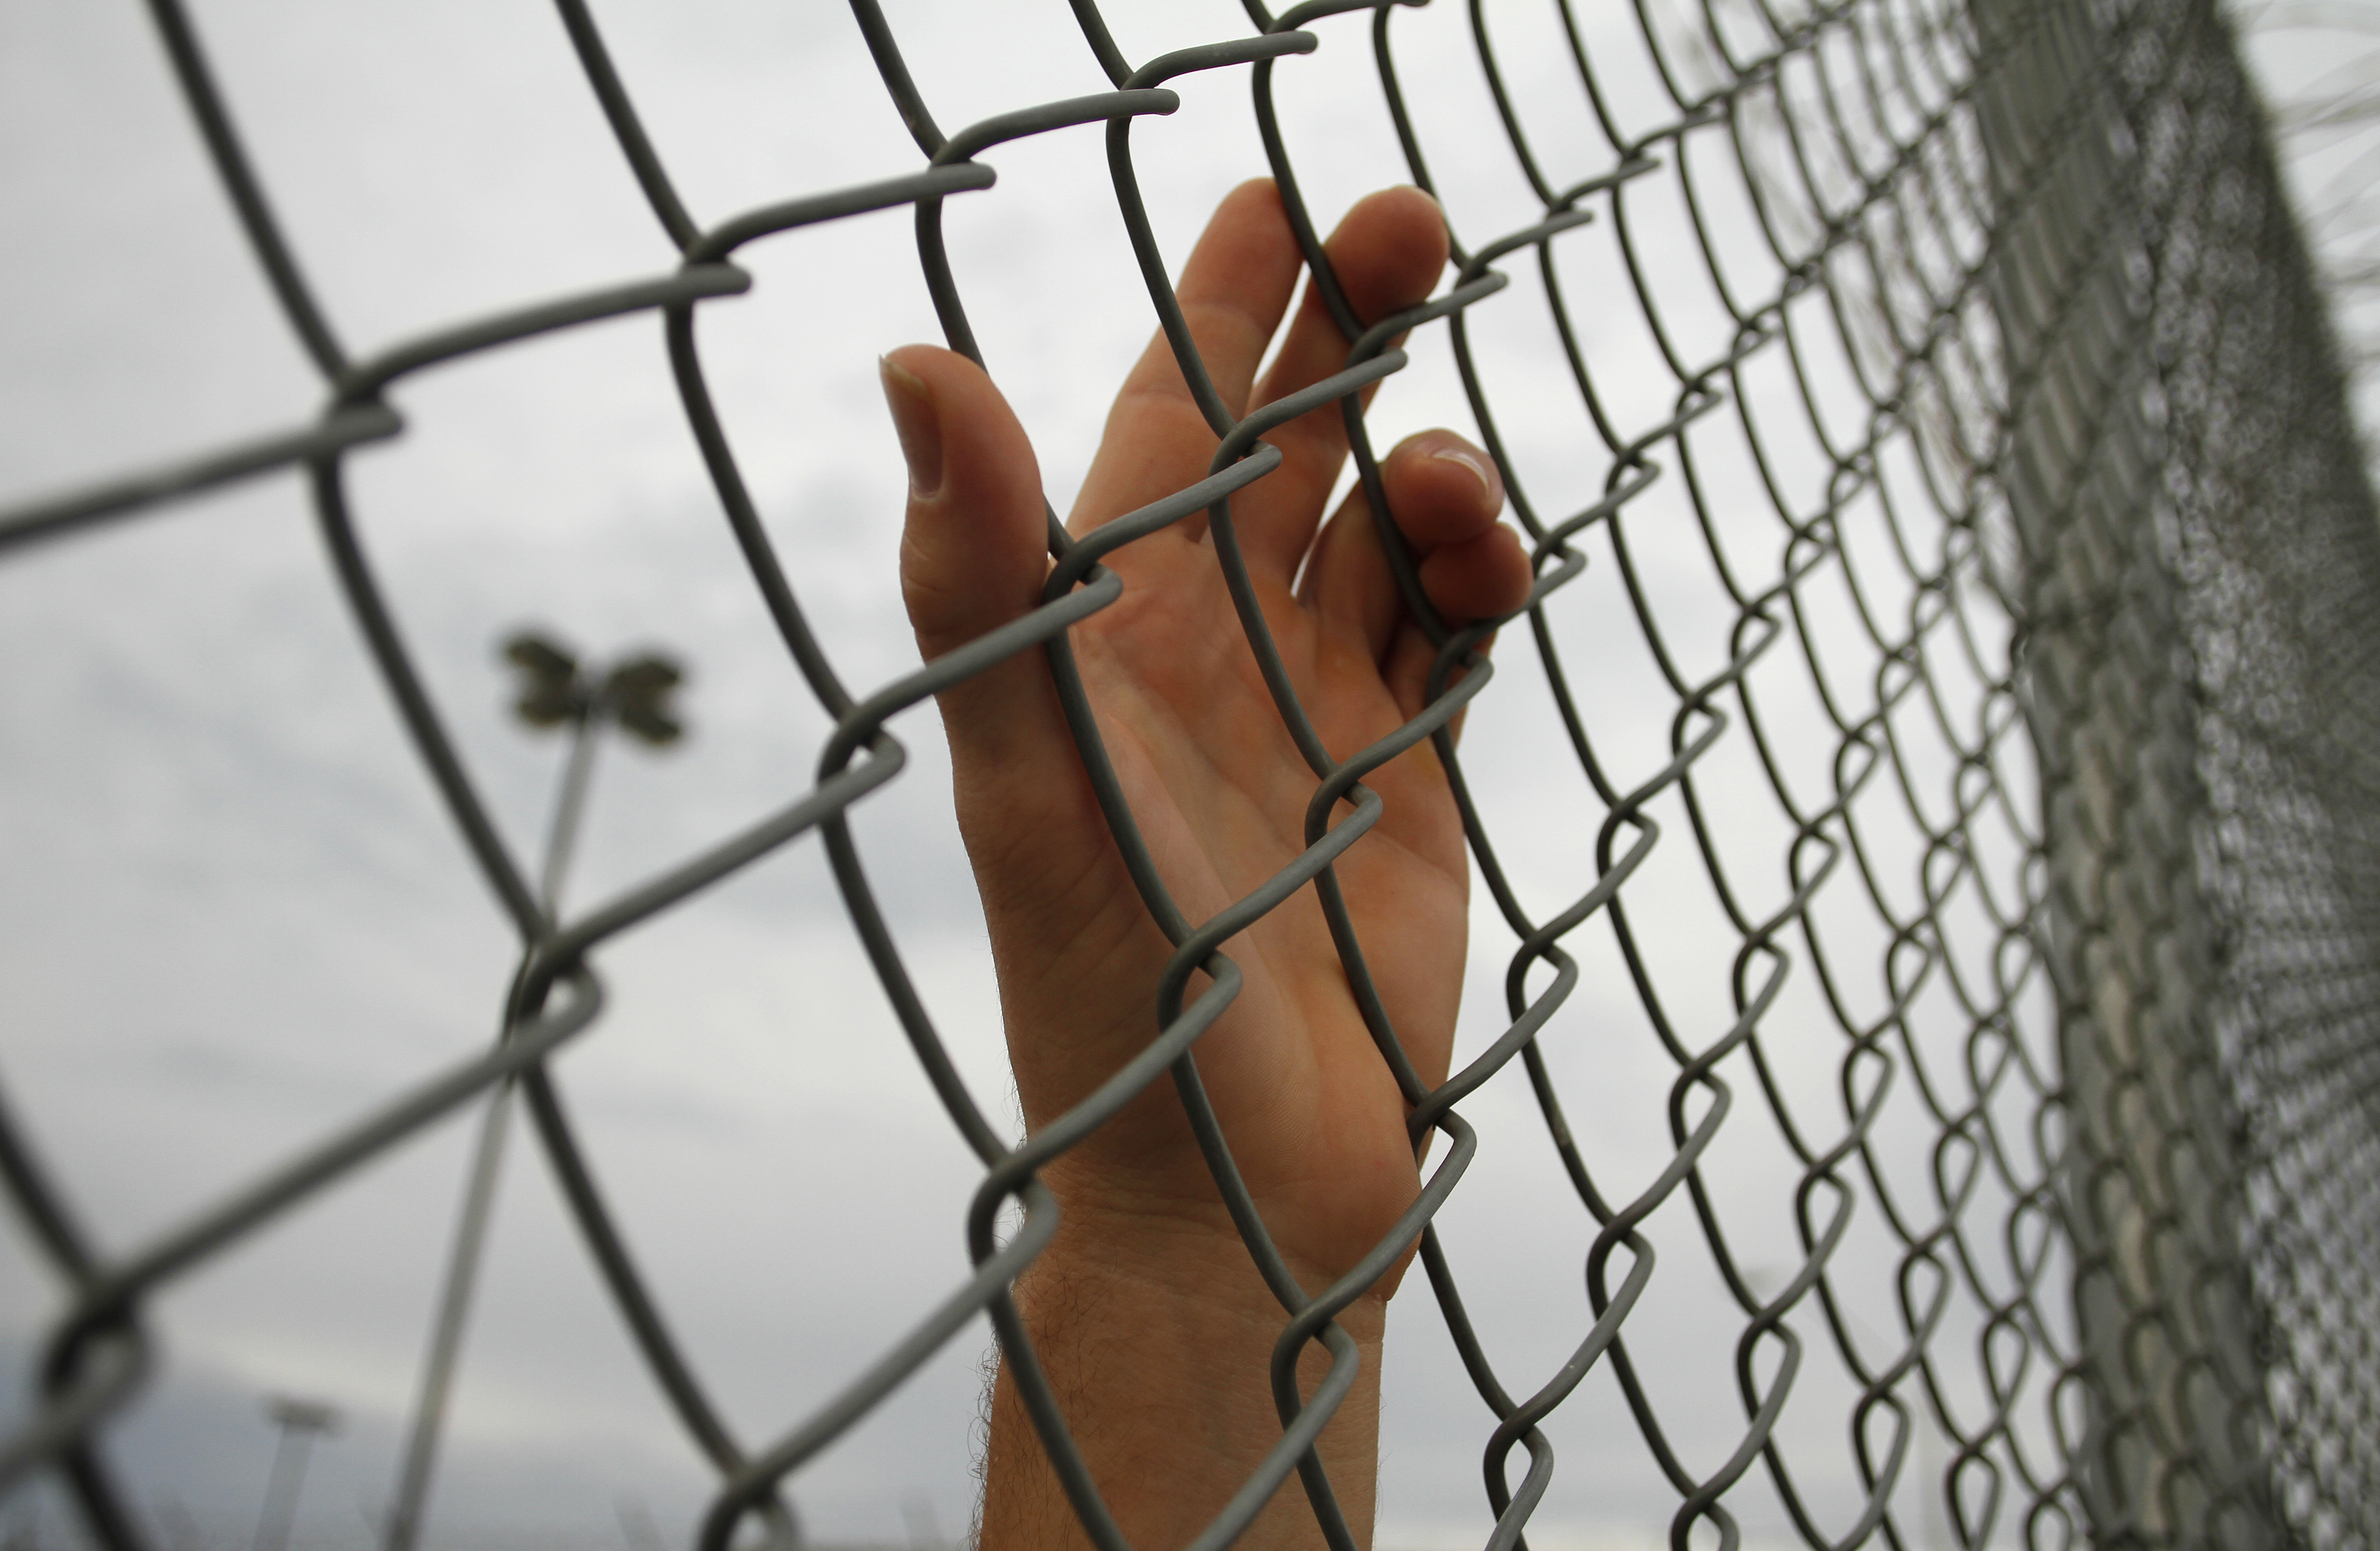 An inmate serving a jail sentence rests his hand on a fence at Maricopa County's Tent City jail in Phoenix